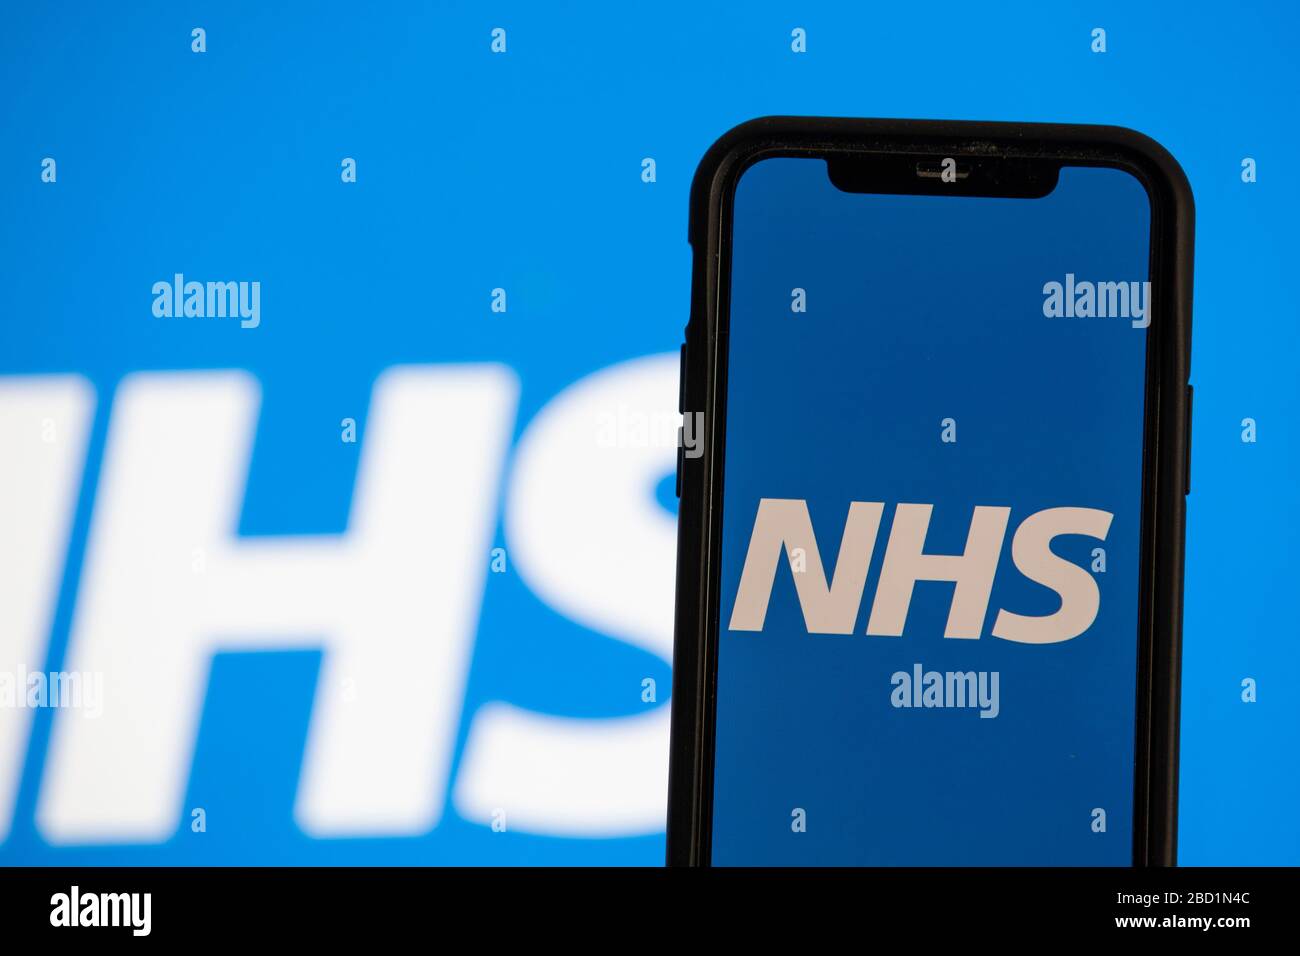 LONDON, UK - April 6th 2020: NHS National health service logo on a smartphone Stock Photo